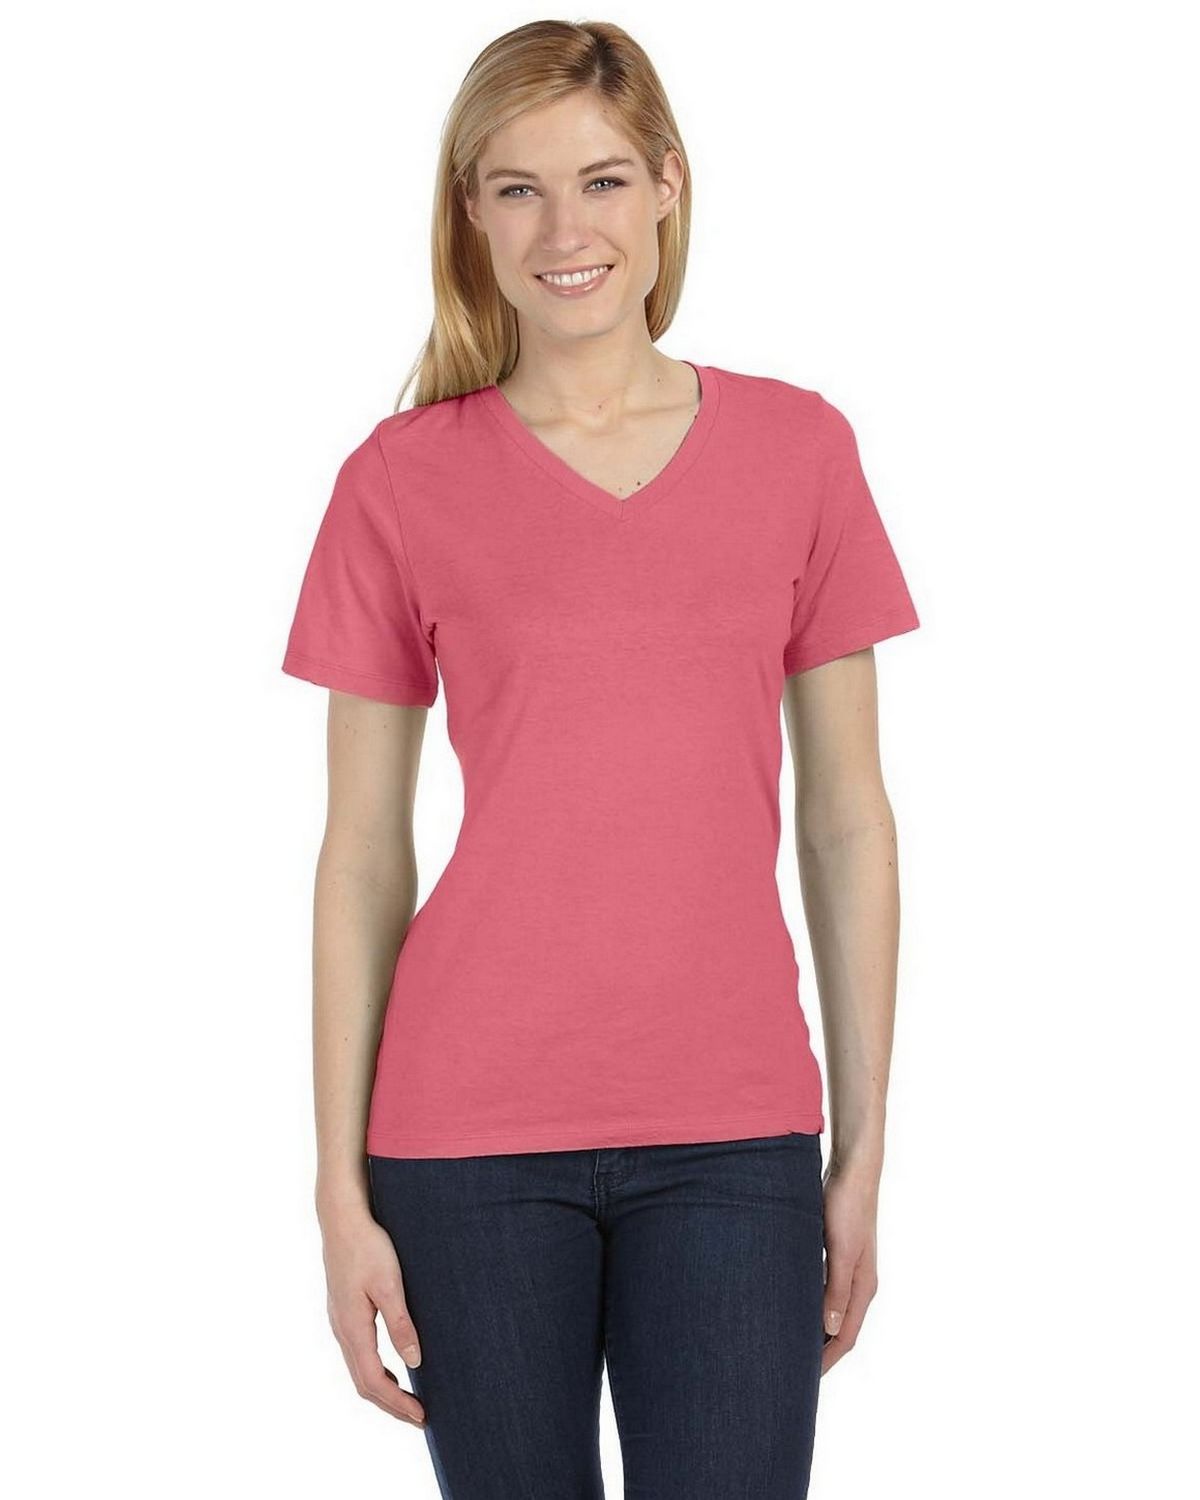 Bella + Canvas 6405 Ladies Missy’s Relaxed Jersey Short-Sleeve V-Neck T ...